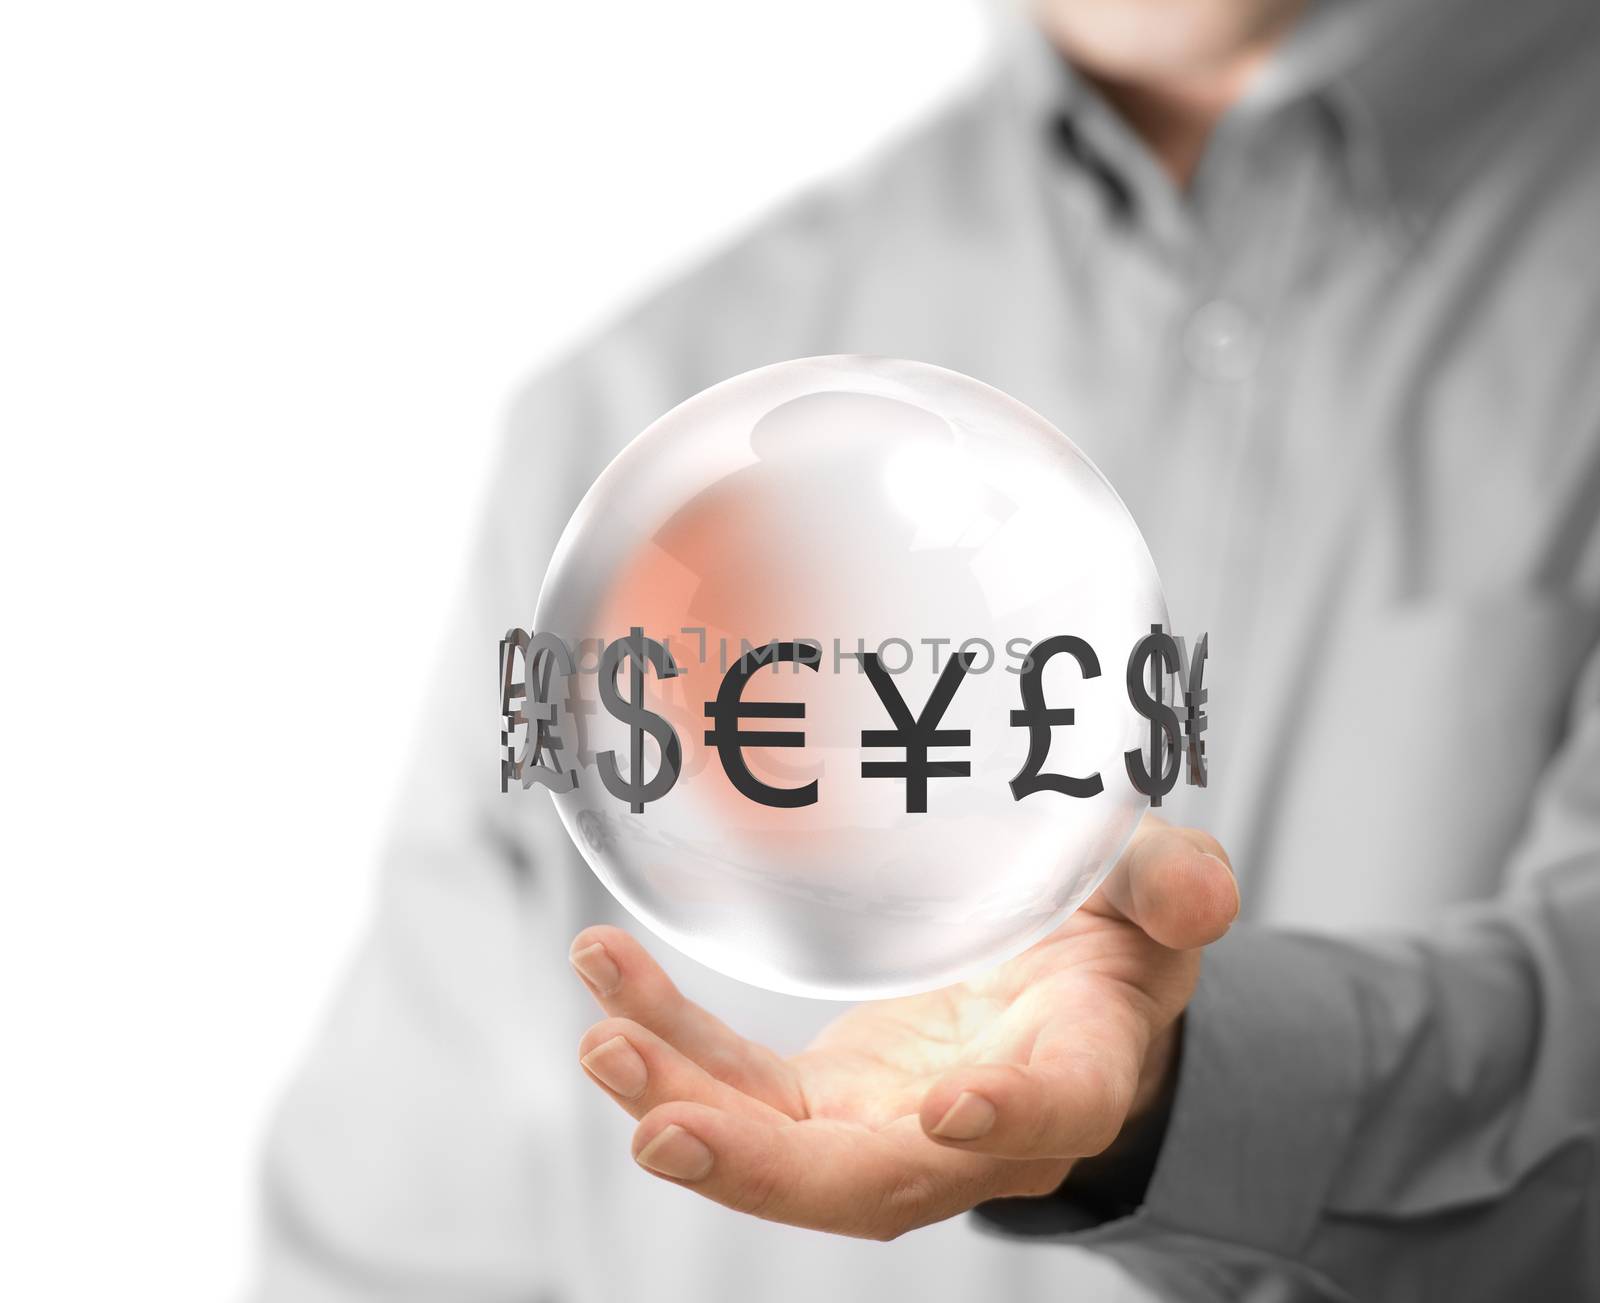 Man hand holding glass sphere with currencies around it. Concept image for illustration of currency exchange.